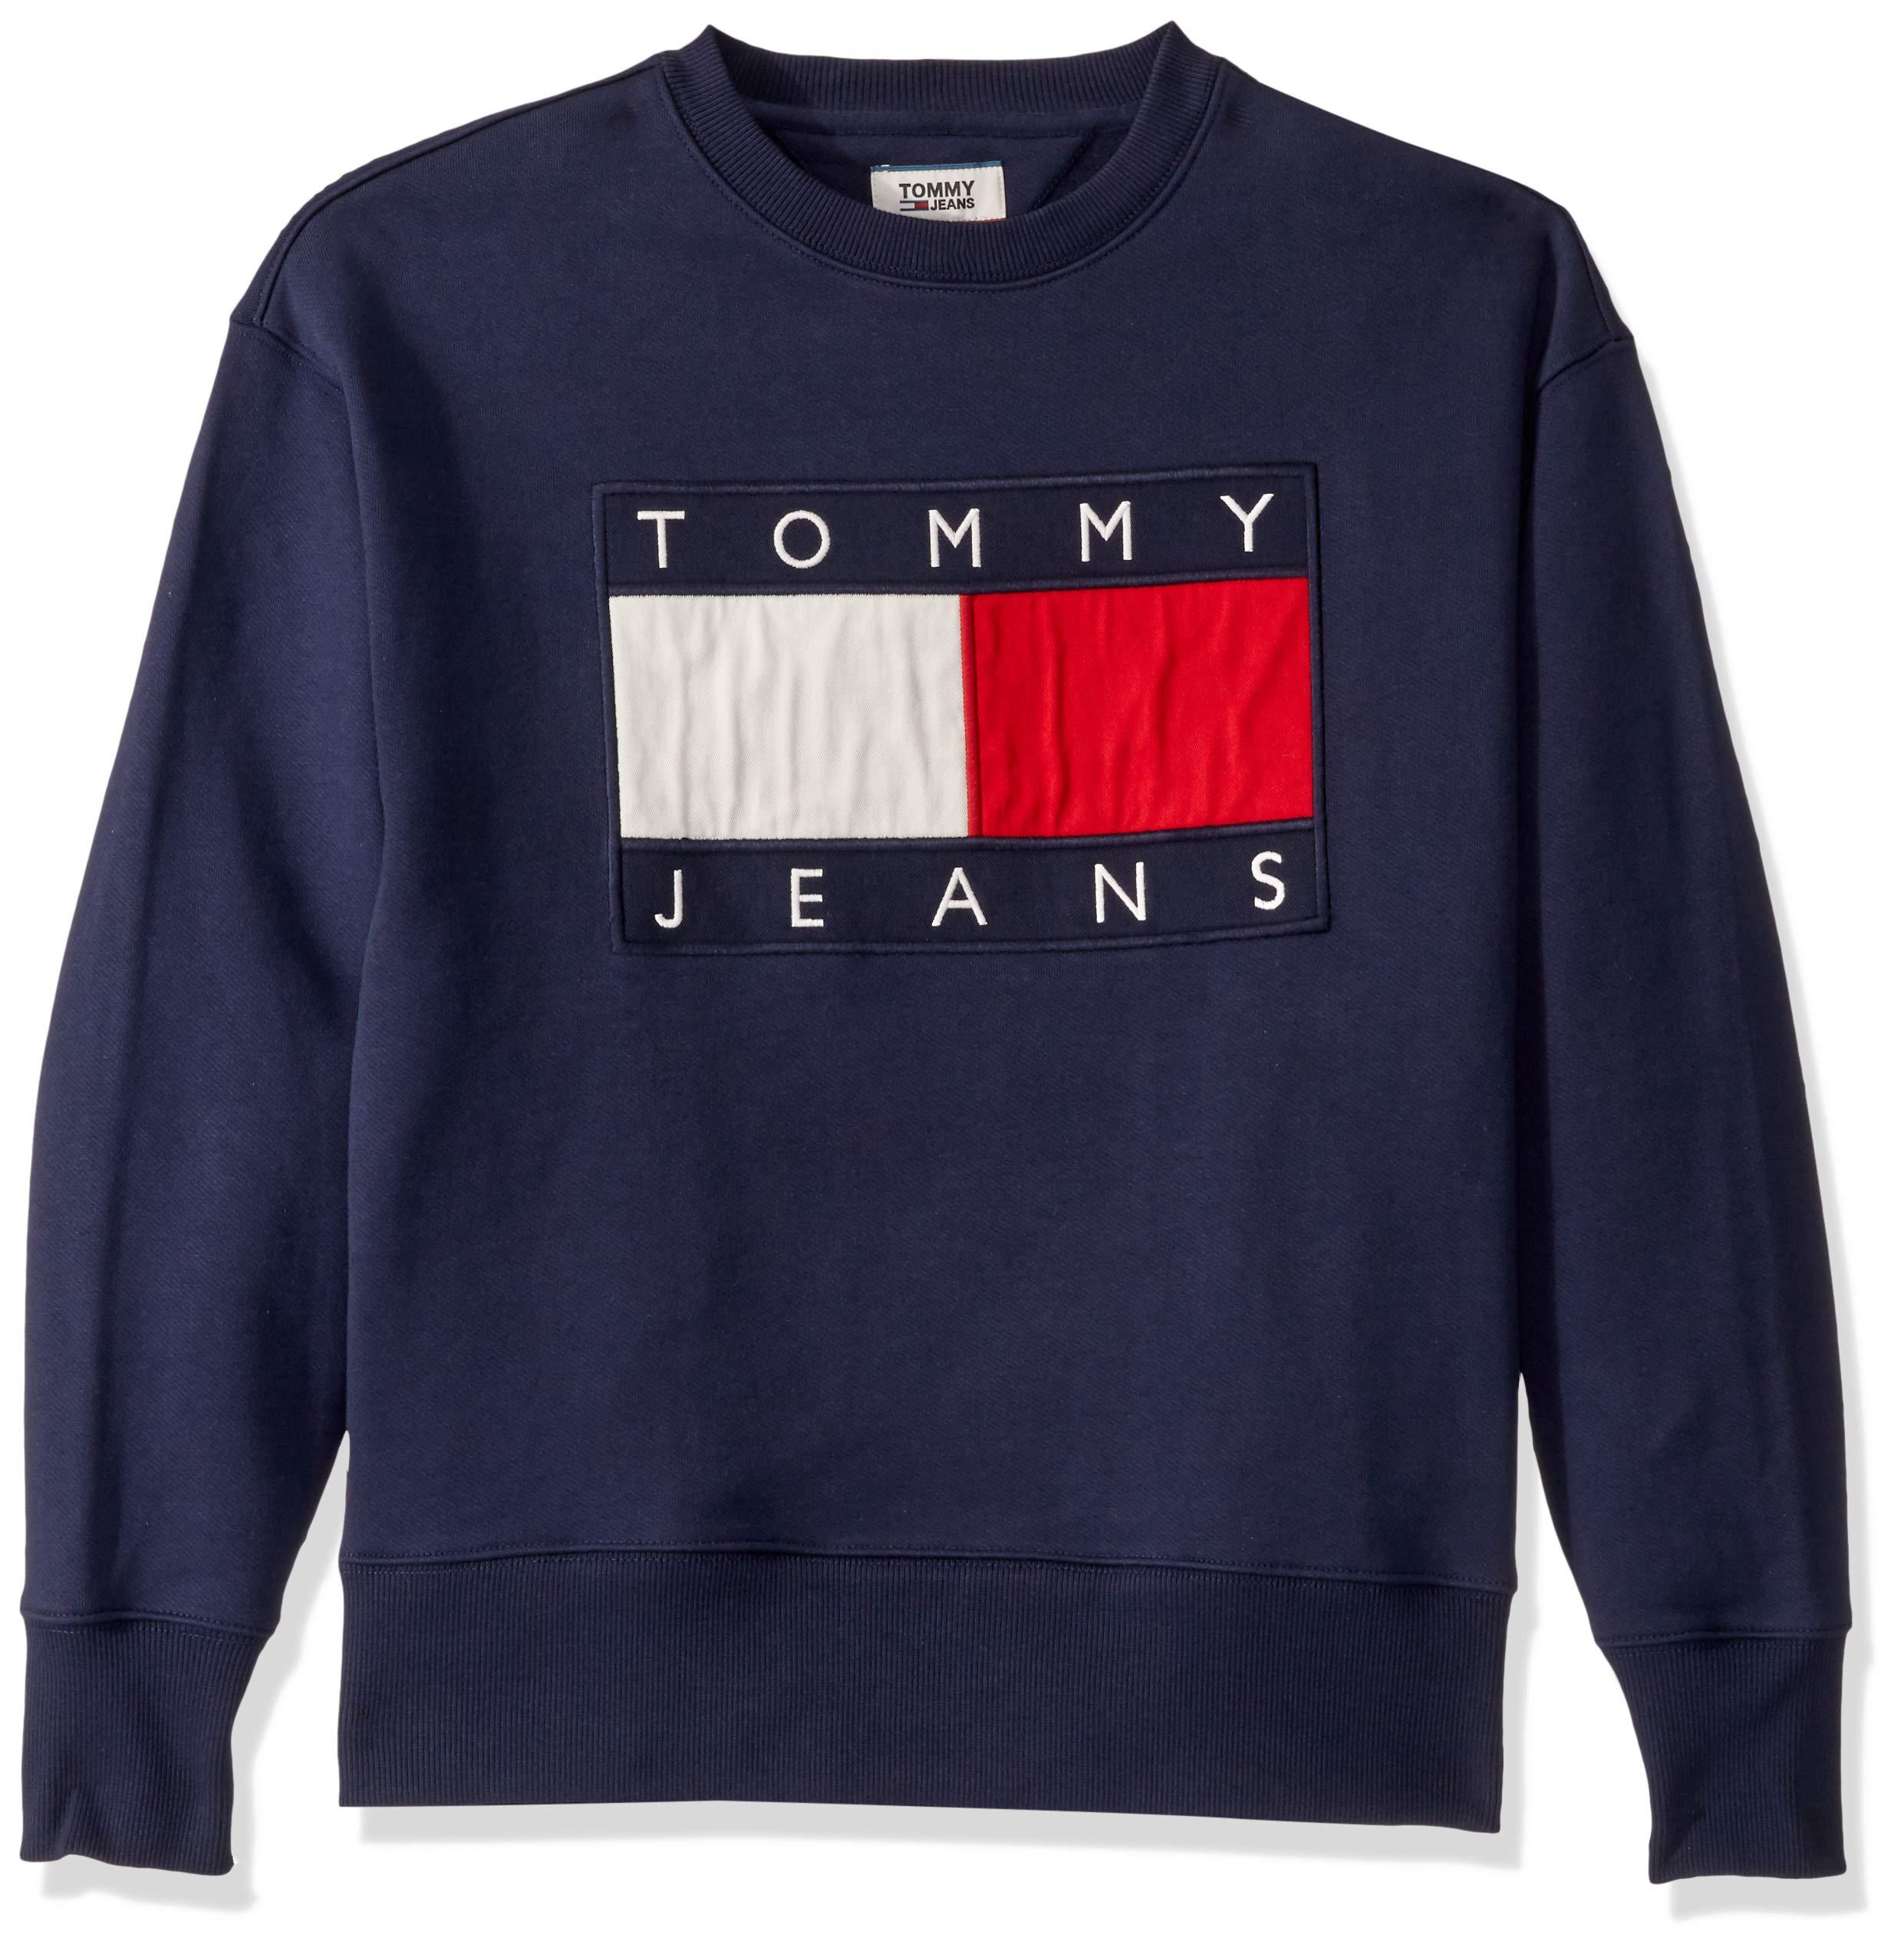 Tommy Hilfiger Denim Tommy Jeans Limited Edition T-shirt in Black Iris ...